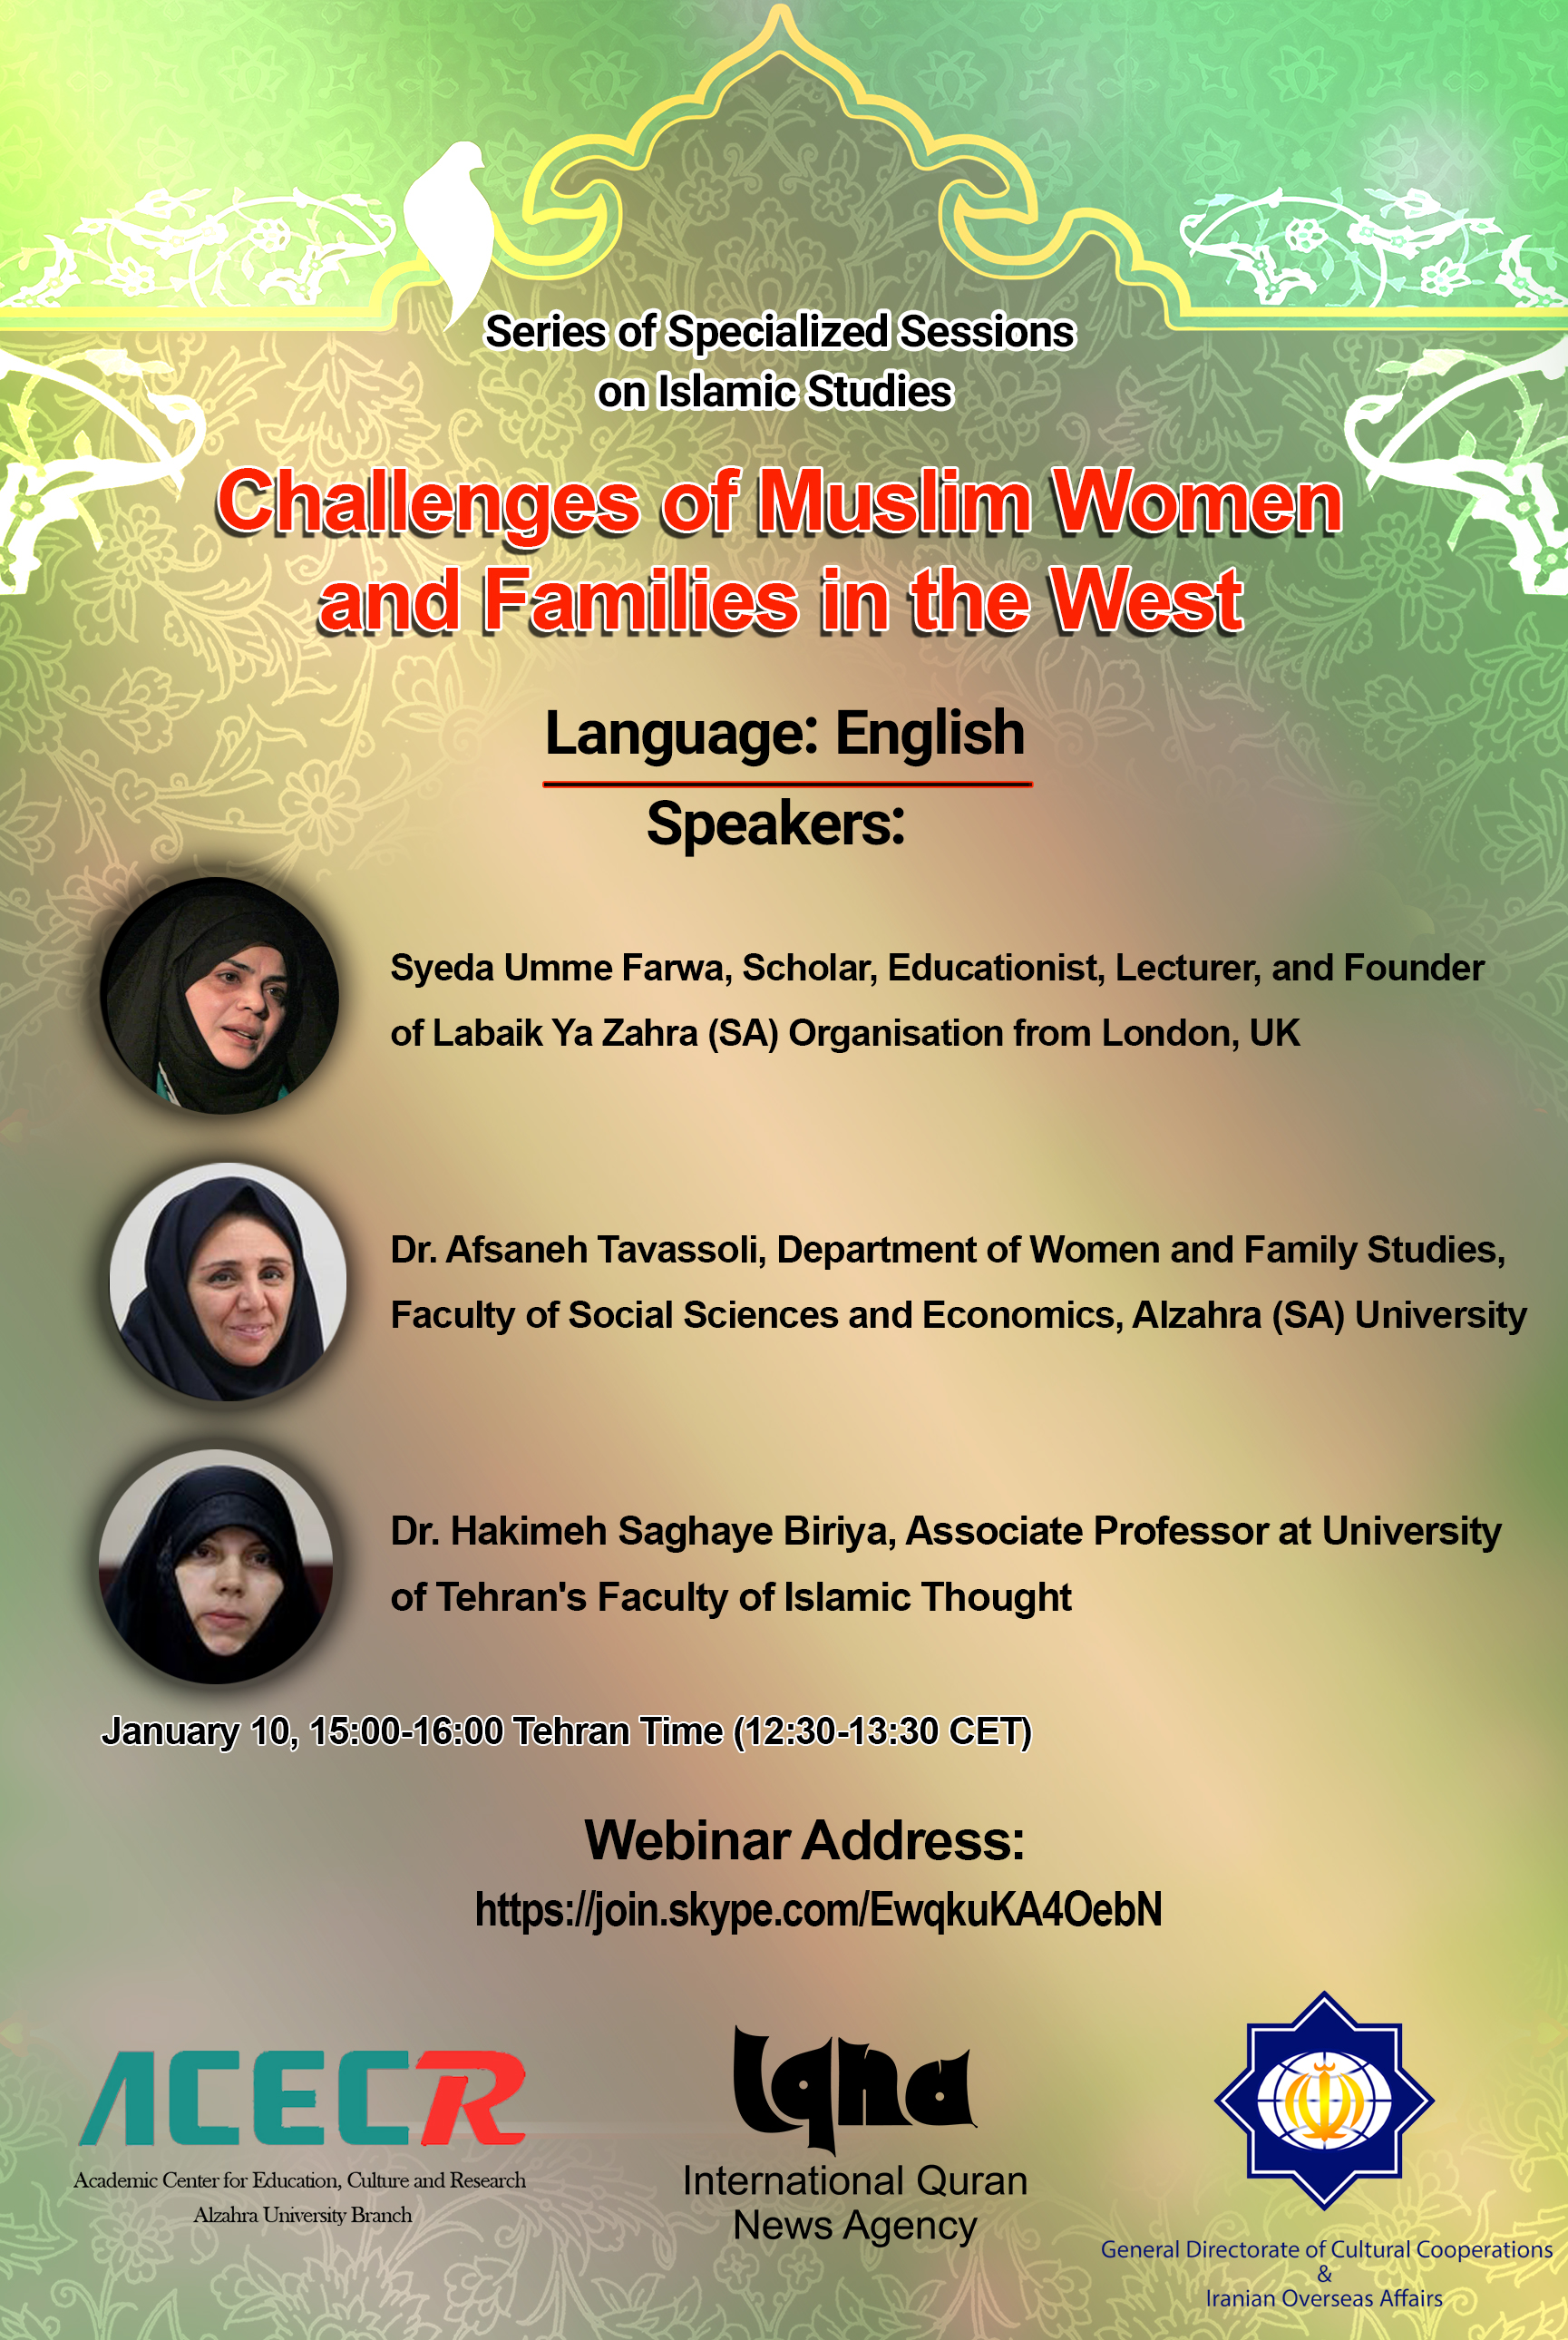 Int'l Webinar on Muslim Families in Western Countries Scheduled for Jan. 10